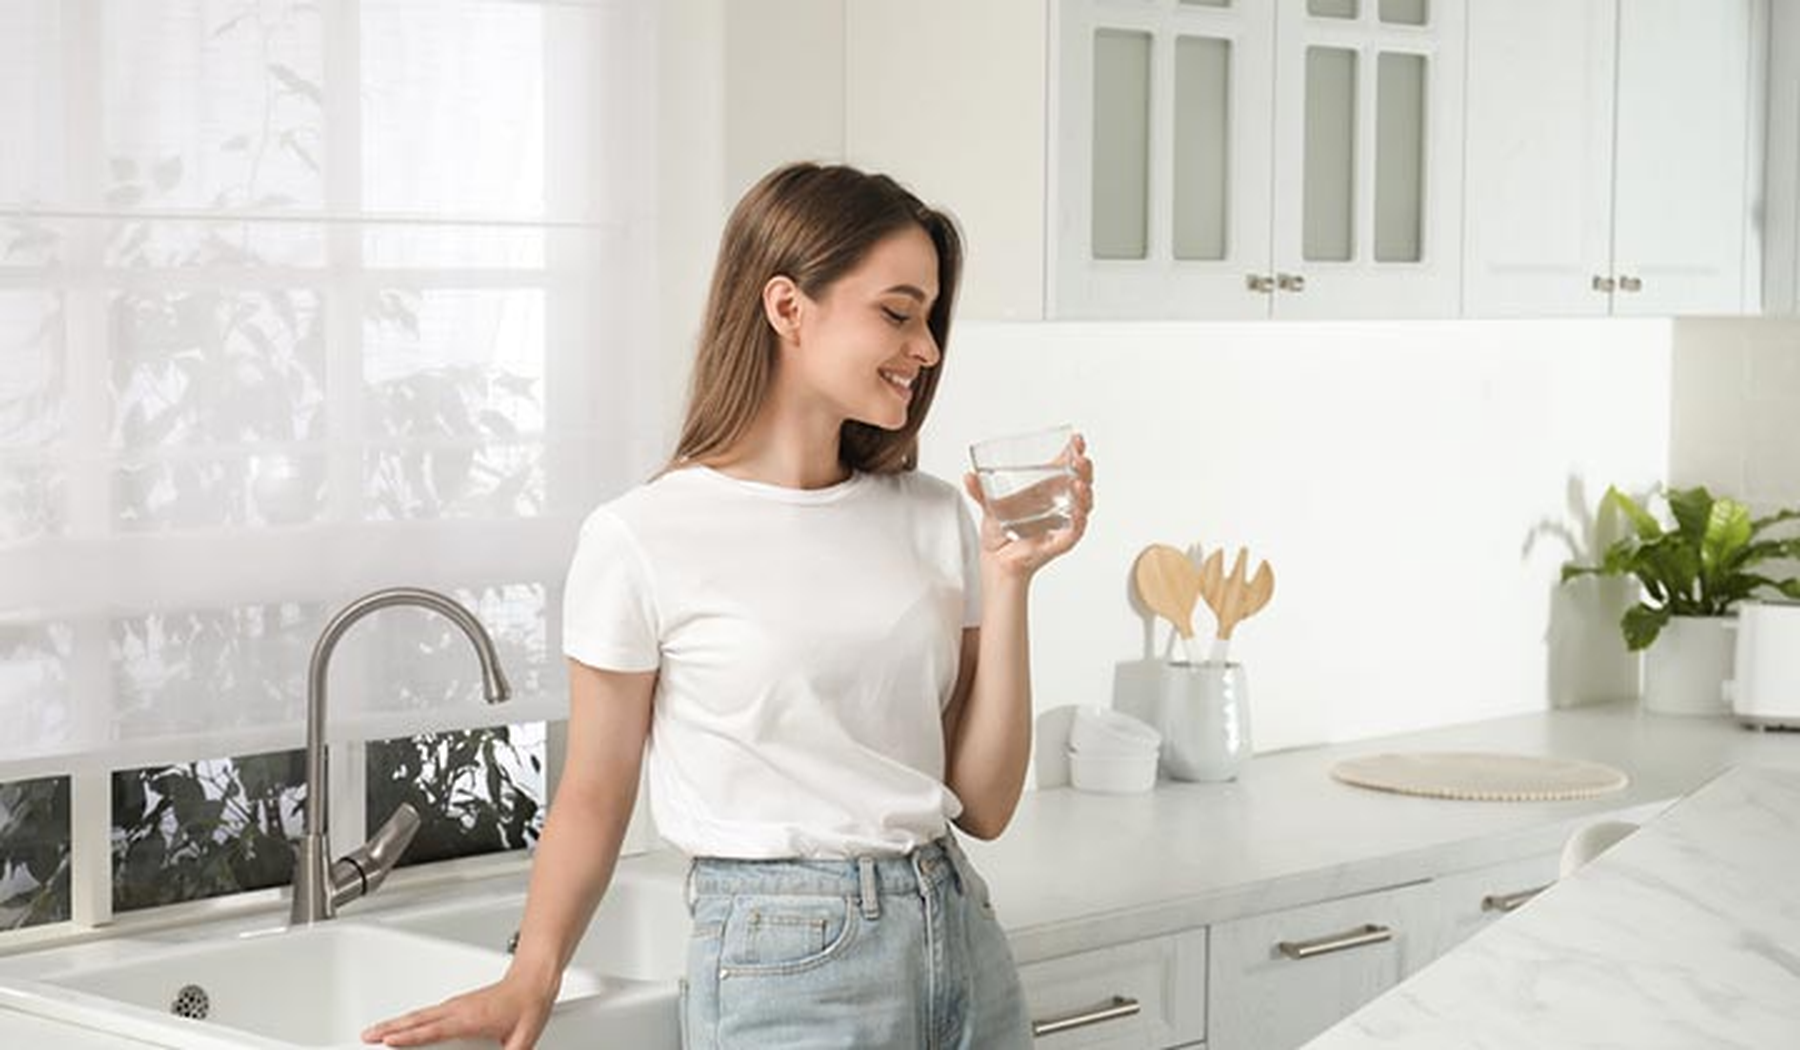 Smiling young woman holding a glass of water in the kitchen